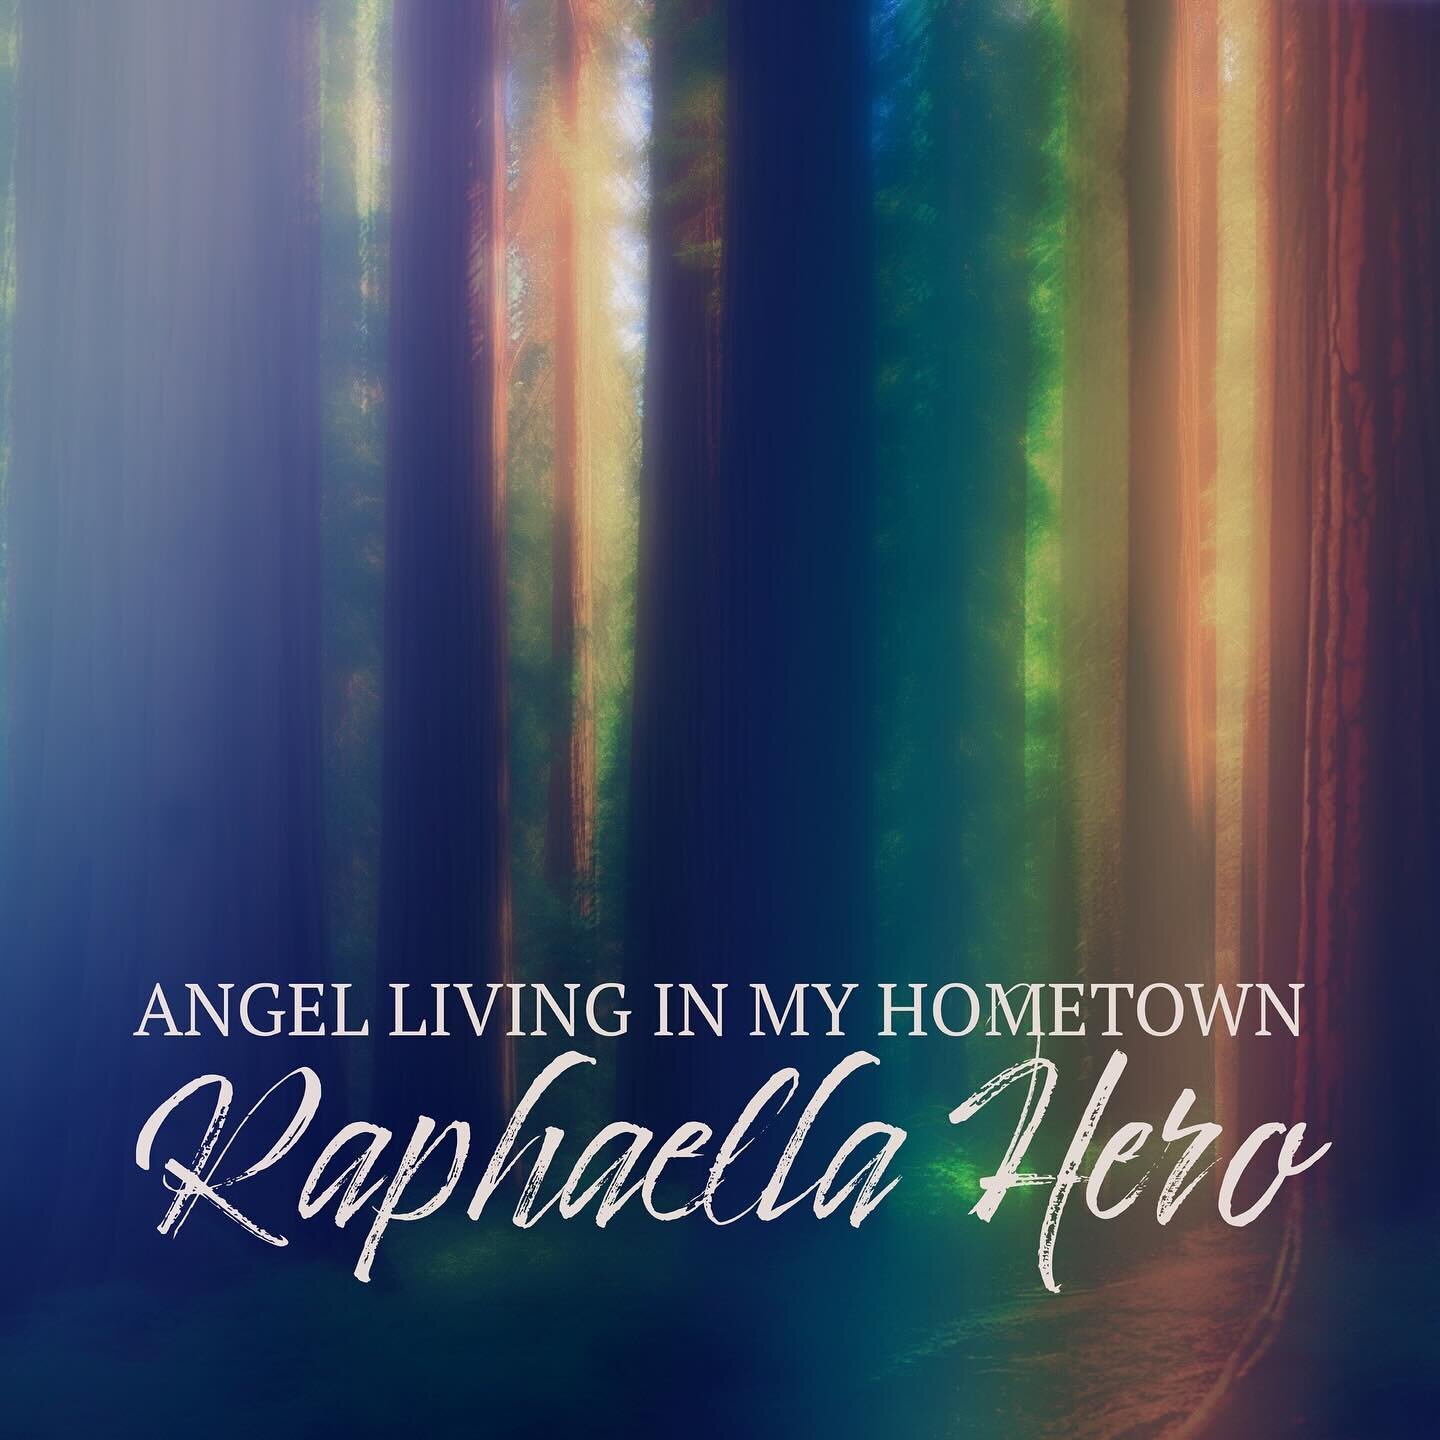 Angel Living In My Hometown

2-24-24 (out now) 🌝🌞💫⚡️❤️

Written, Arranged, Performed, and Produced by Raphaella Hero
Engineered by Fisher Thompson (@fisherthompsonn)
Mastered by Eros Faulk (@erosfaulk)
Cover art by Karima Cammell (@1castleintheair